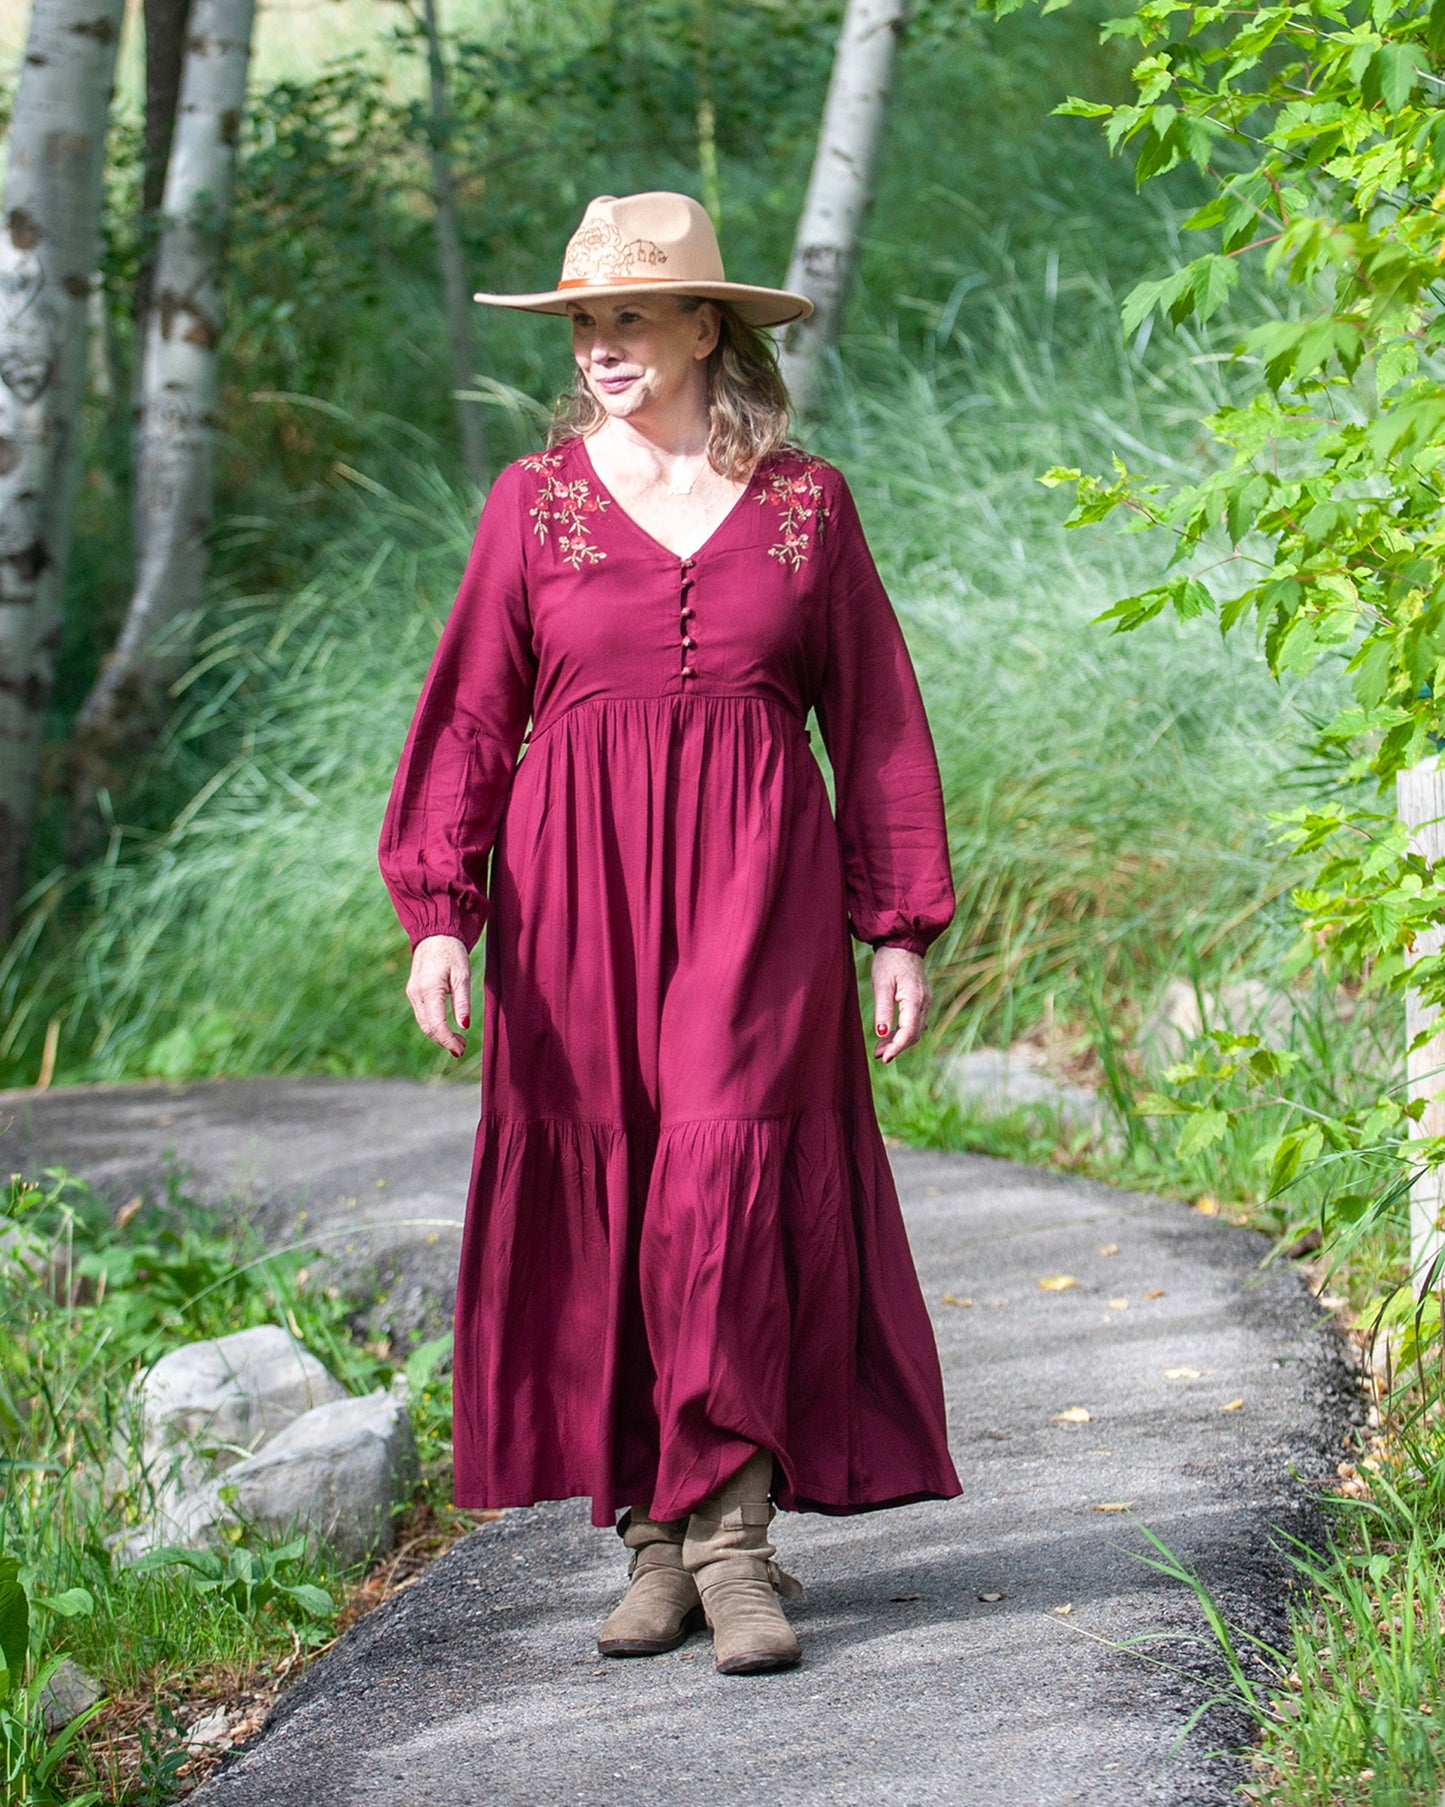 ORCHARD Dress in Plum